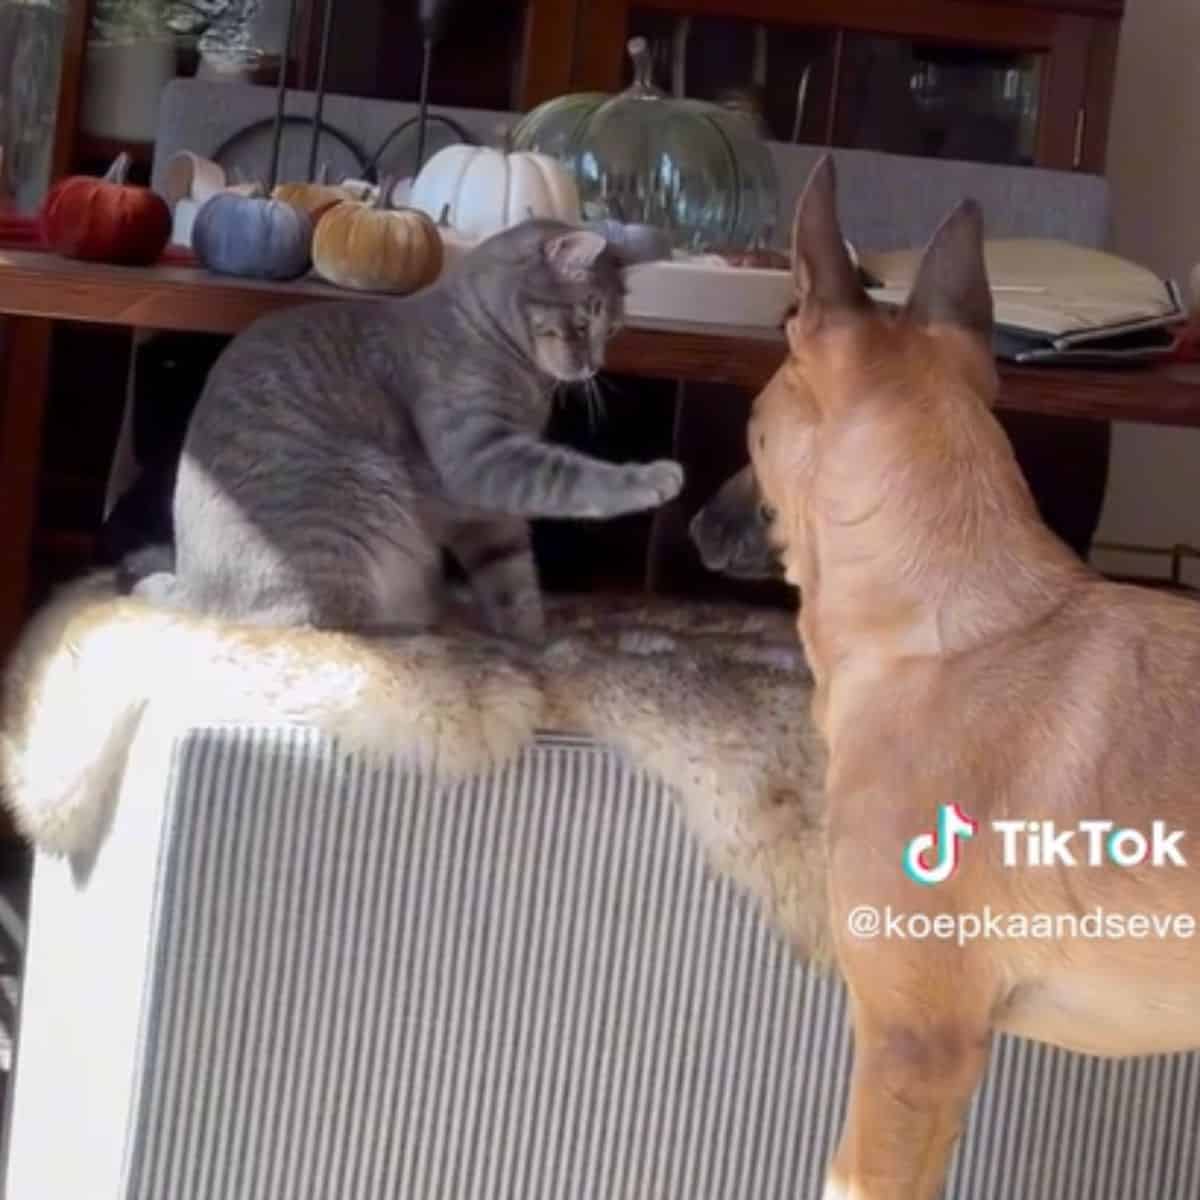 the gray cat teaches the dog